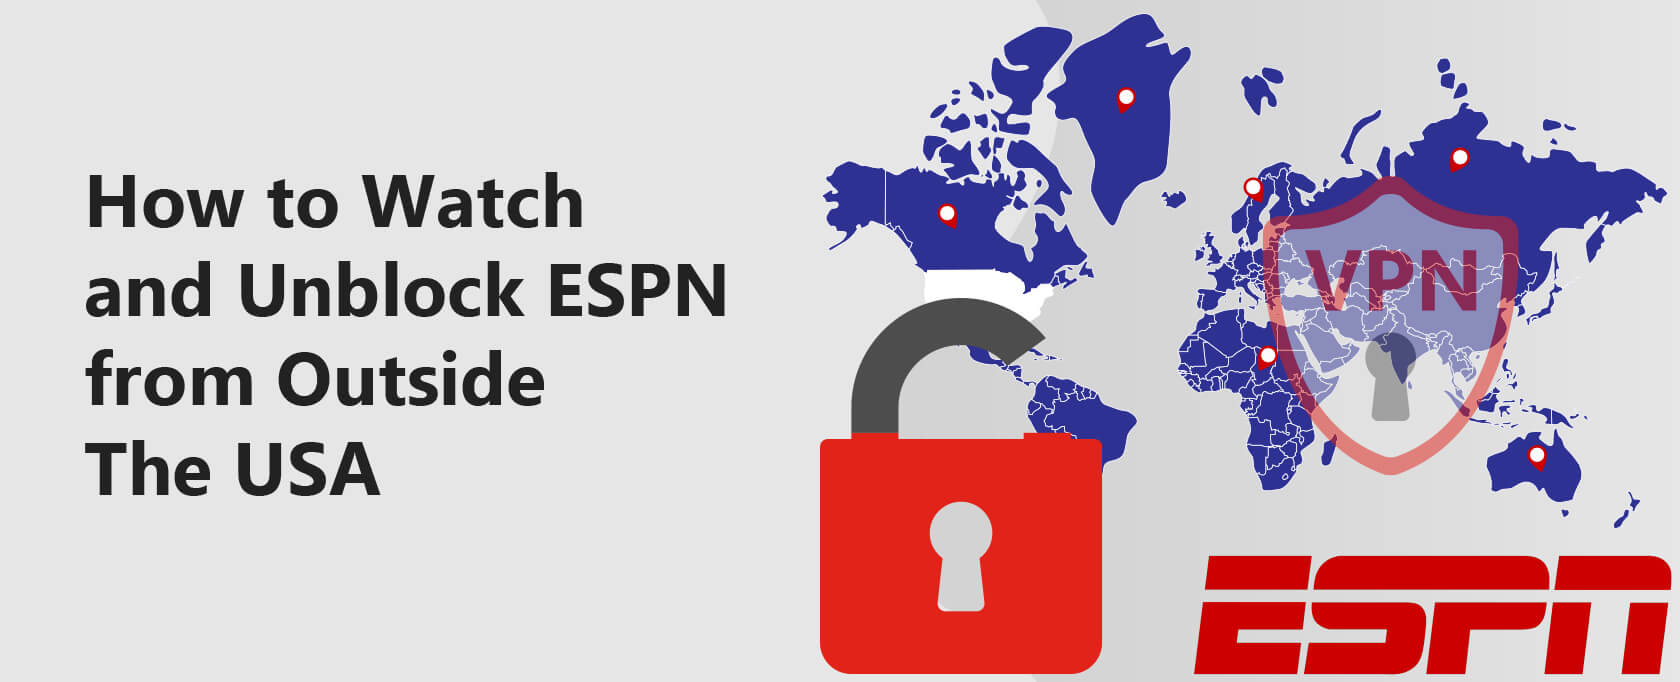 How to Watch and Unblock ESPN from Outside The USA